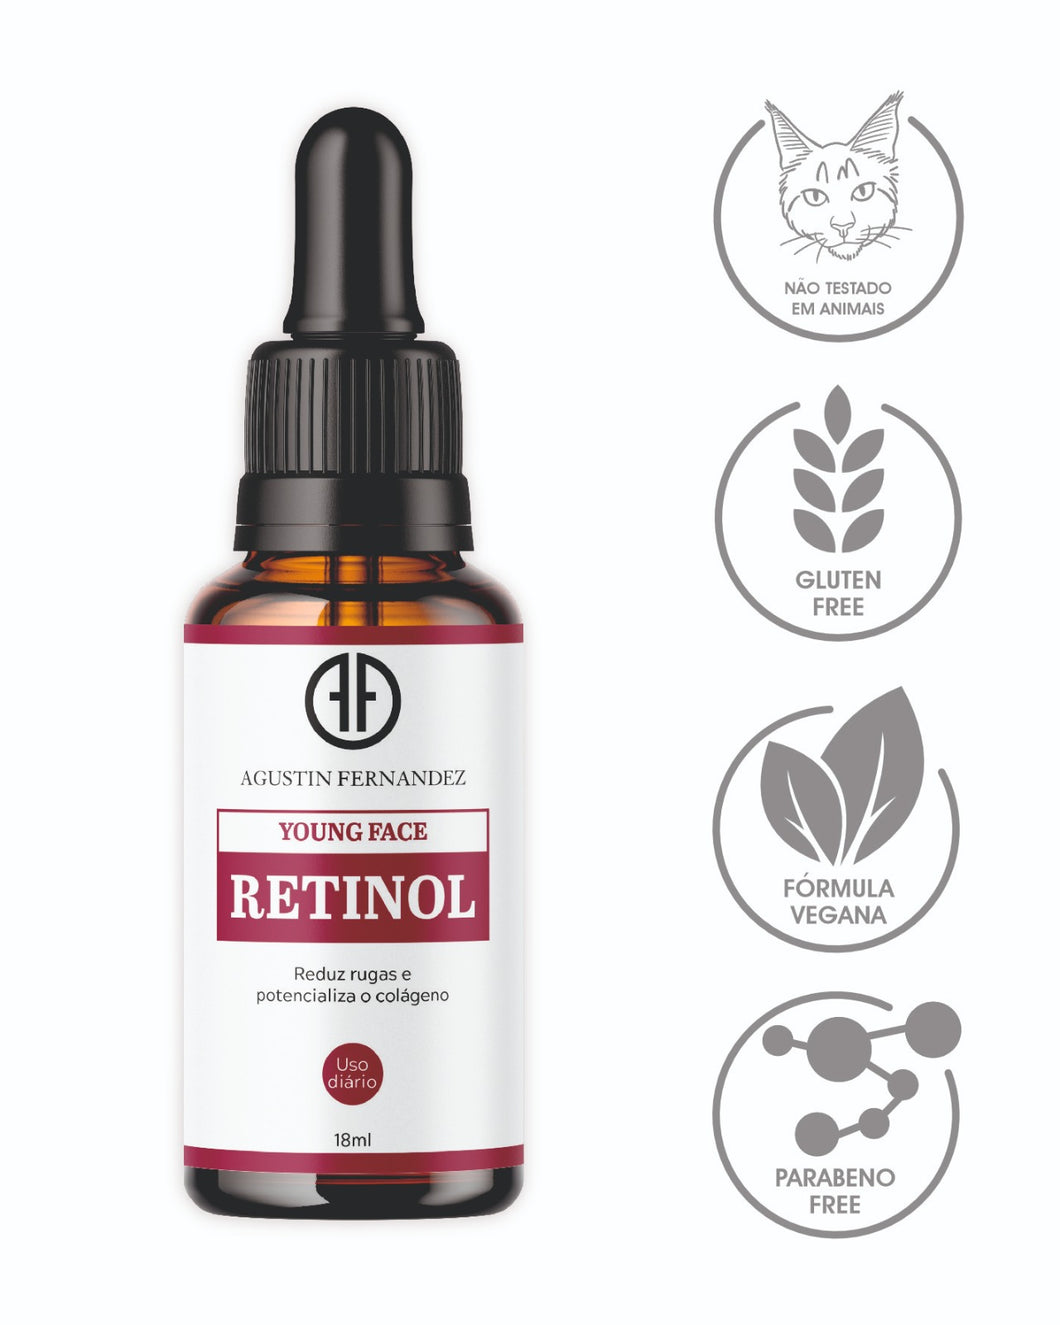 RETINOL Serum for wrinkles, lines and Chinese mustache